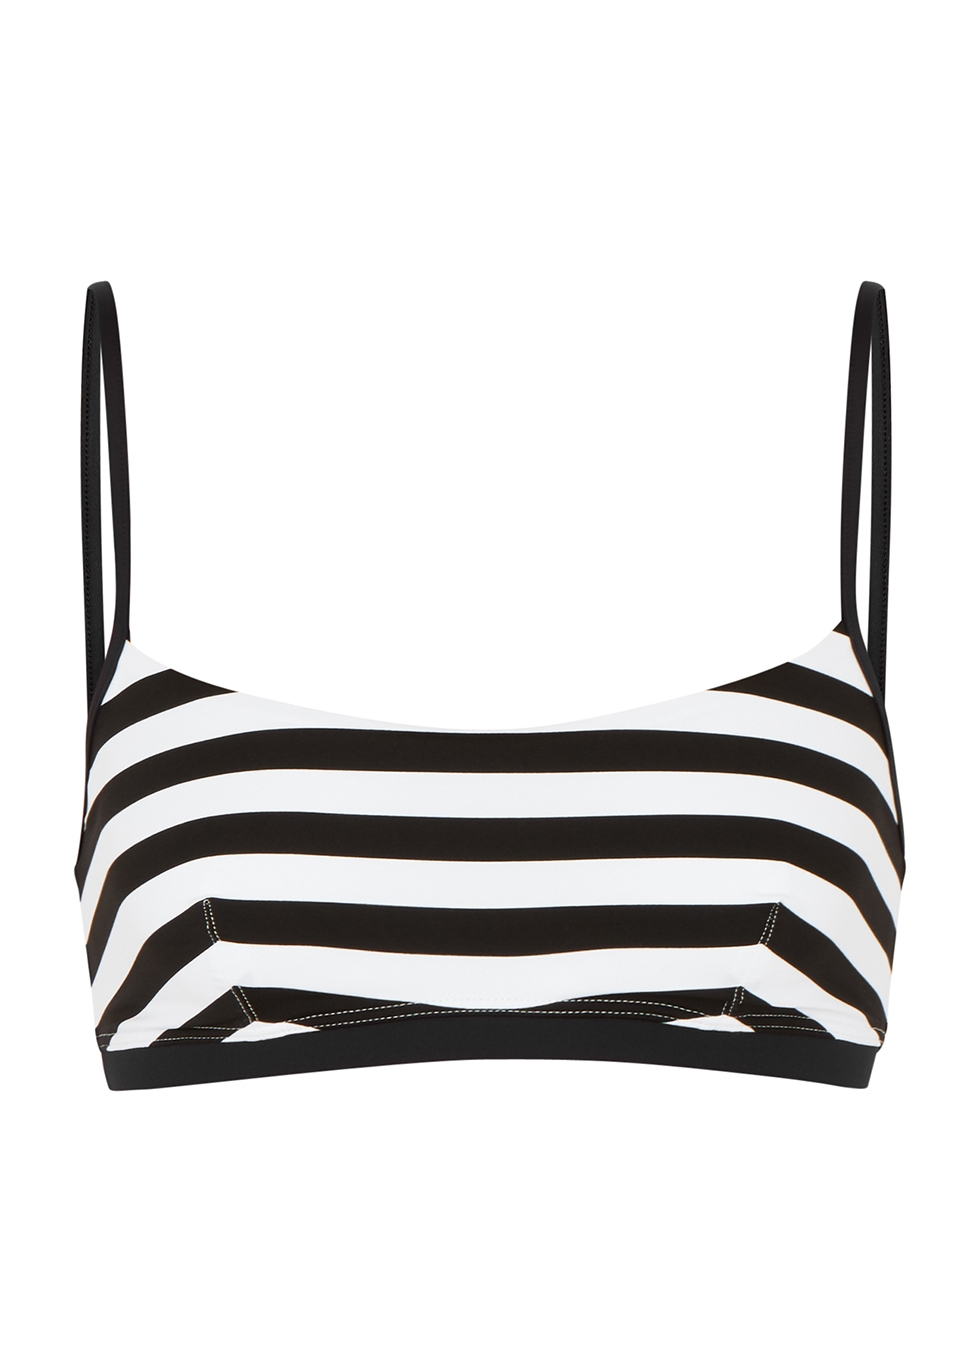 black and white striped swimsuit top